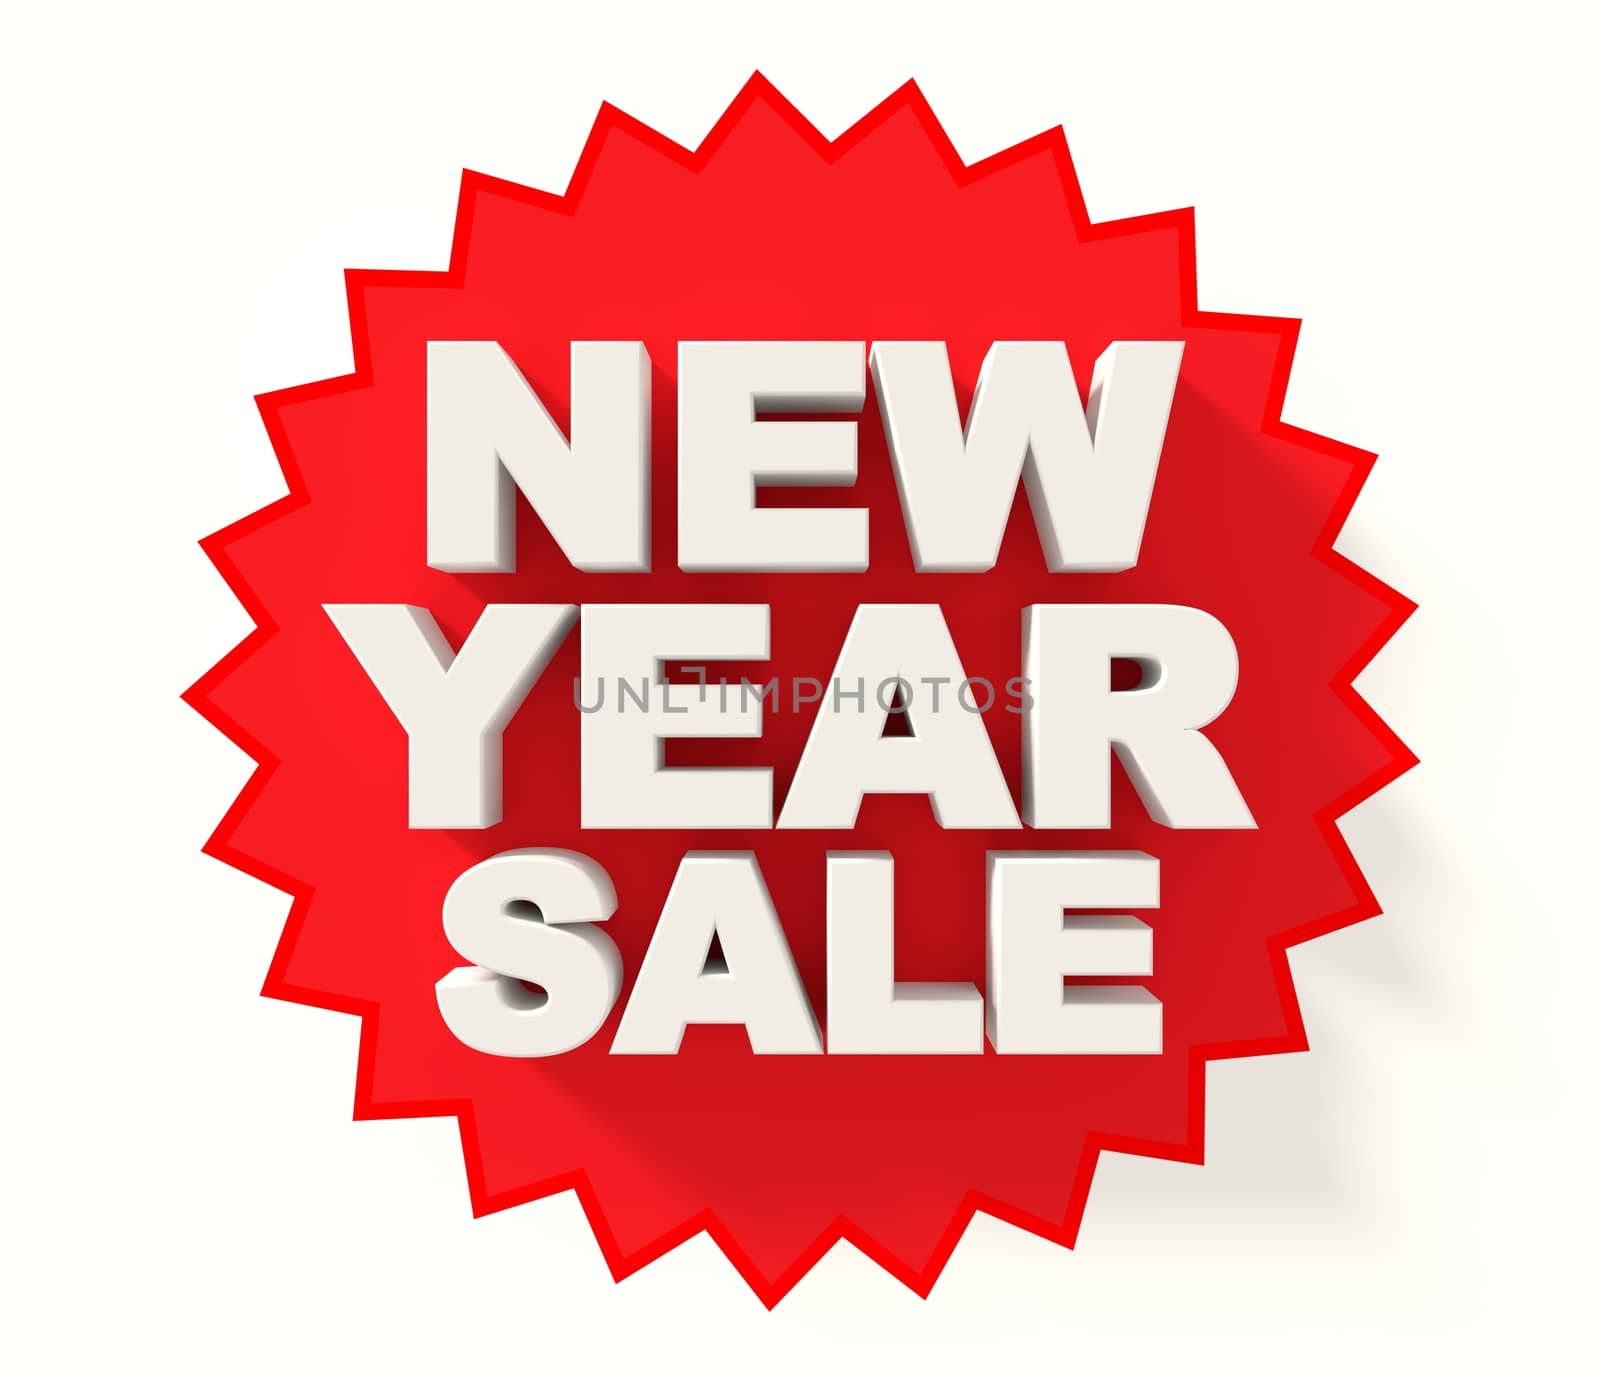 New Year sale sign, white letters on red star background